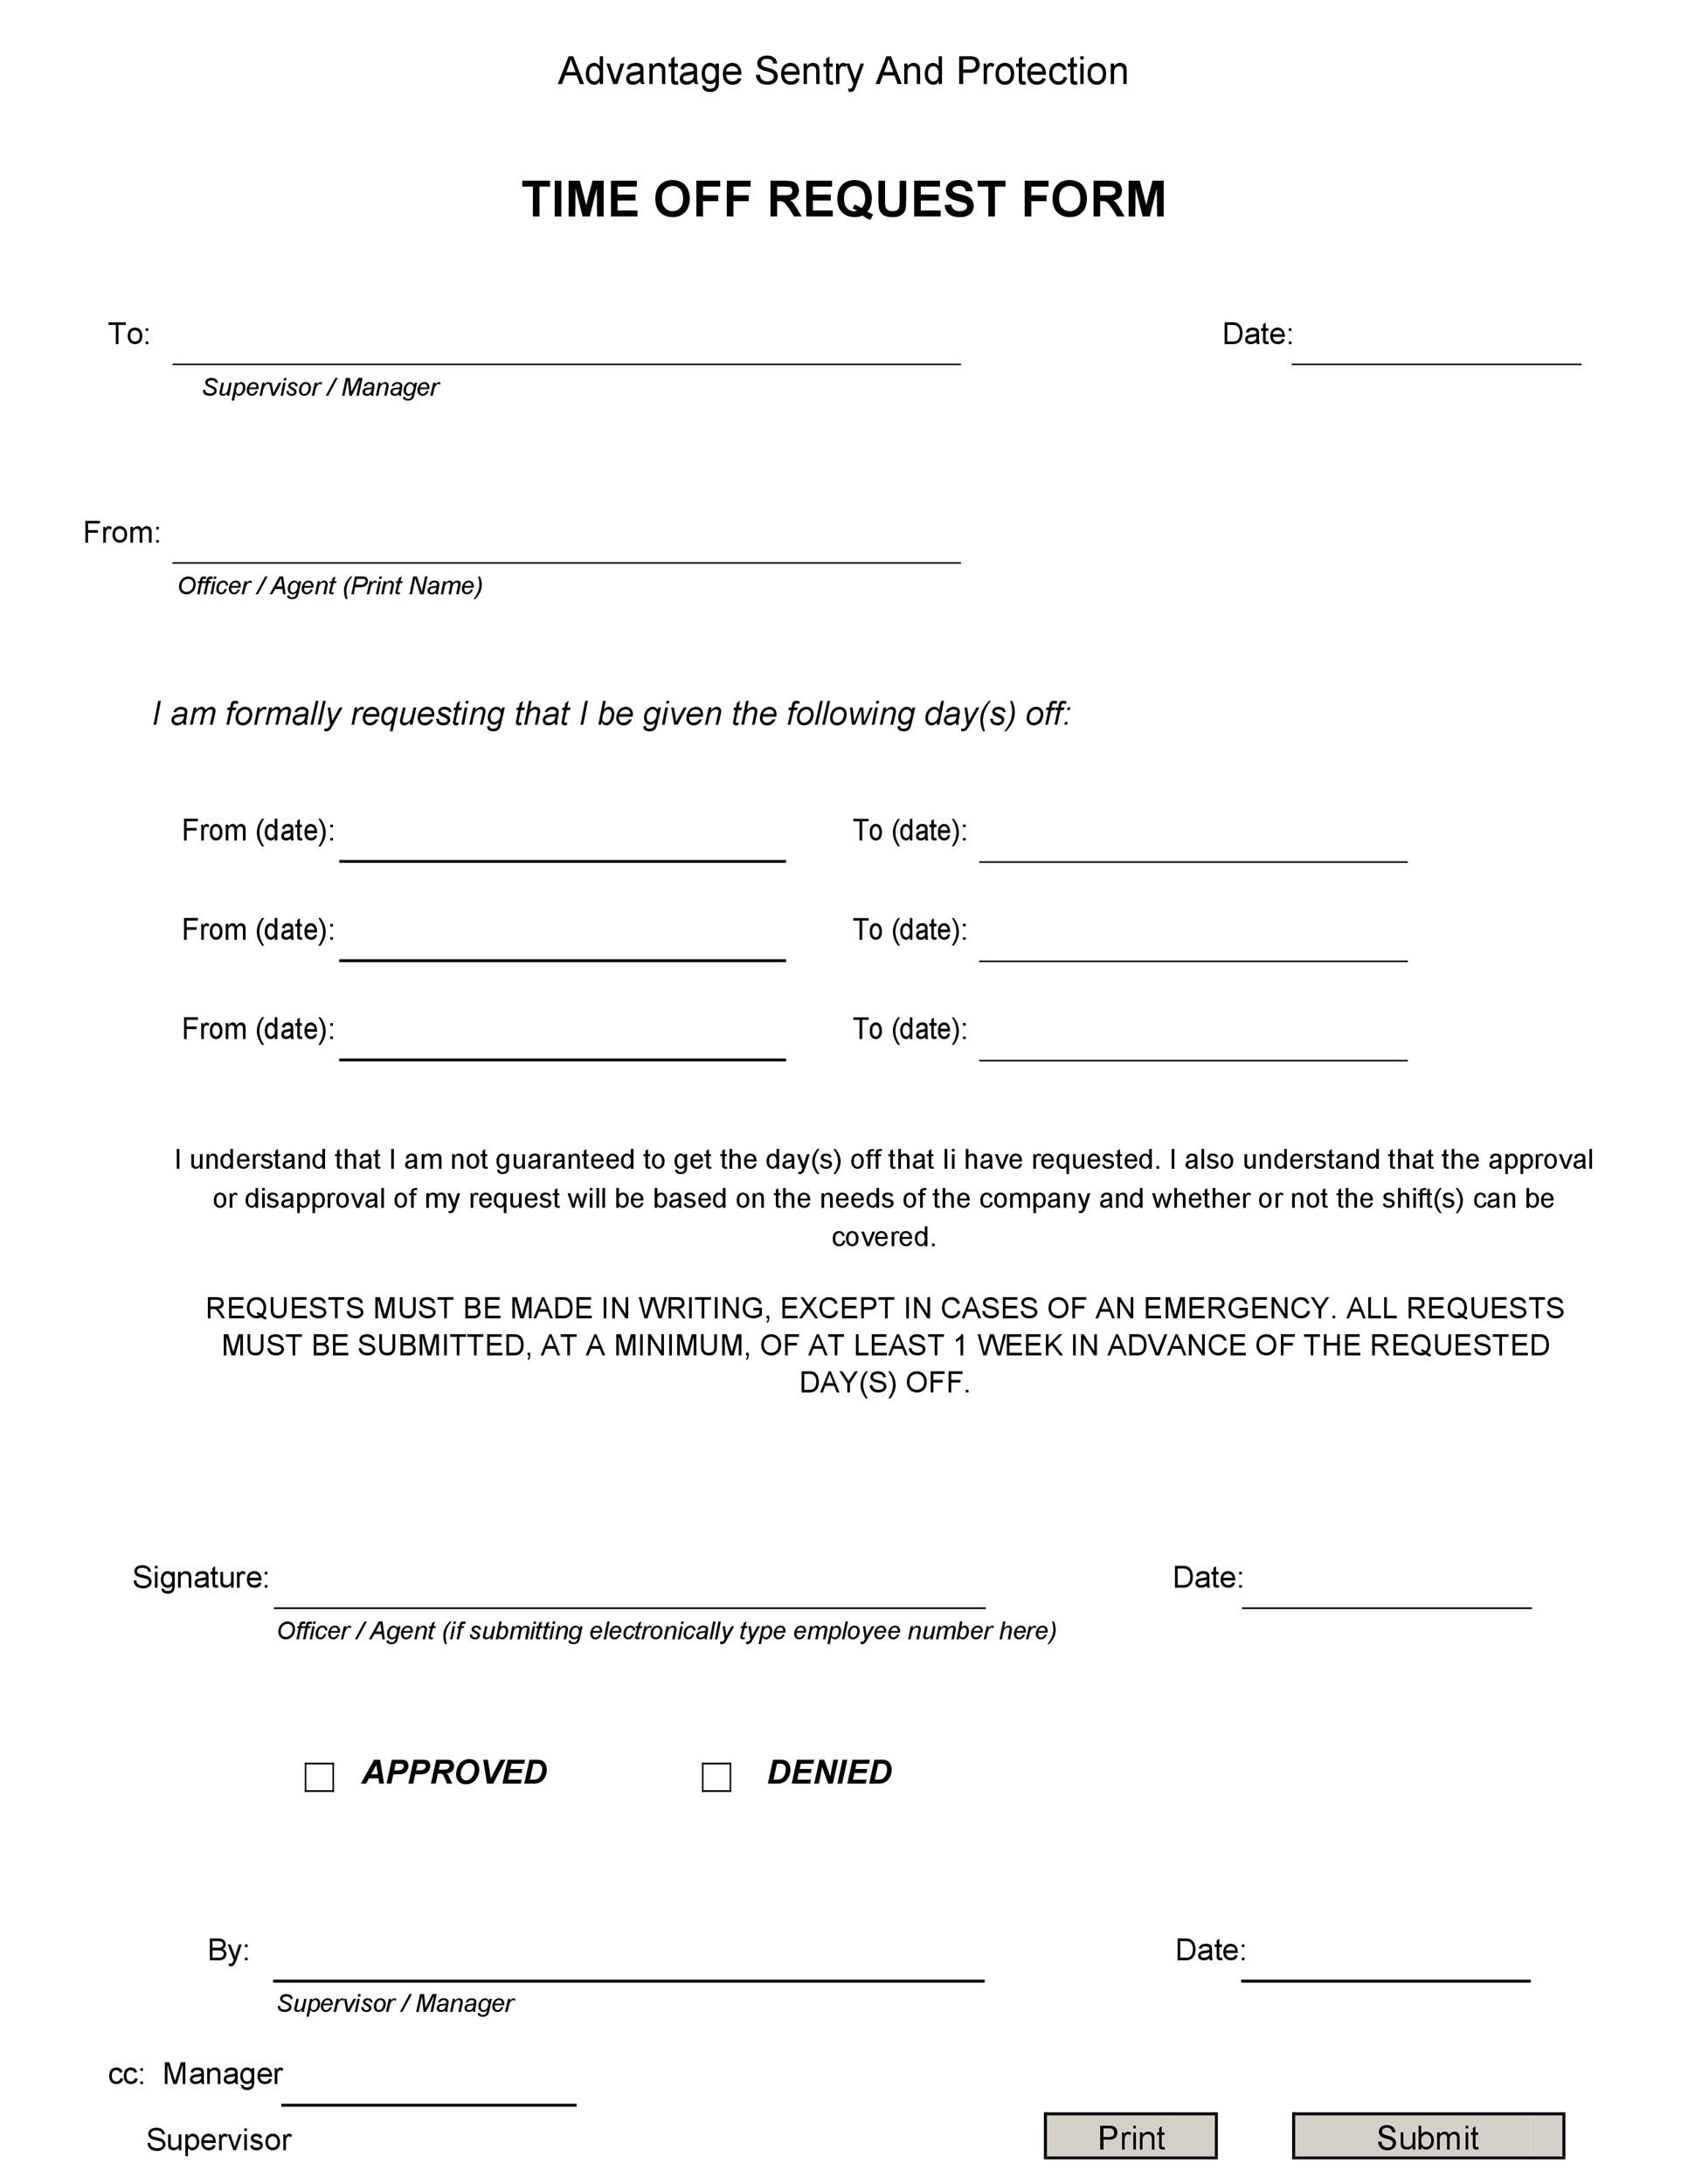 40  Effective Time Off Request Forms Templates ᐅ TemplateLab